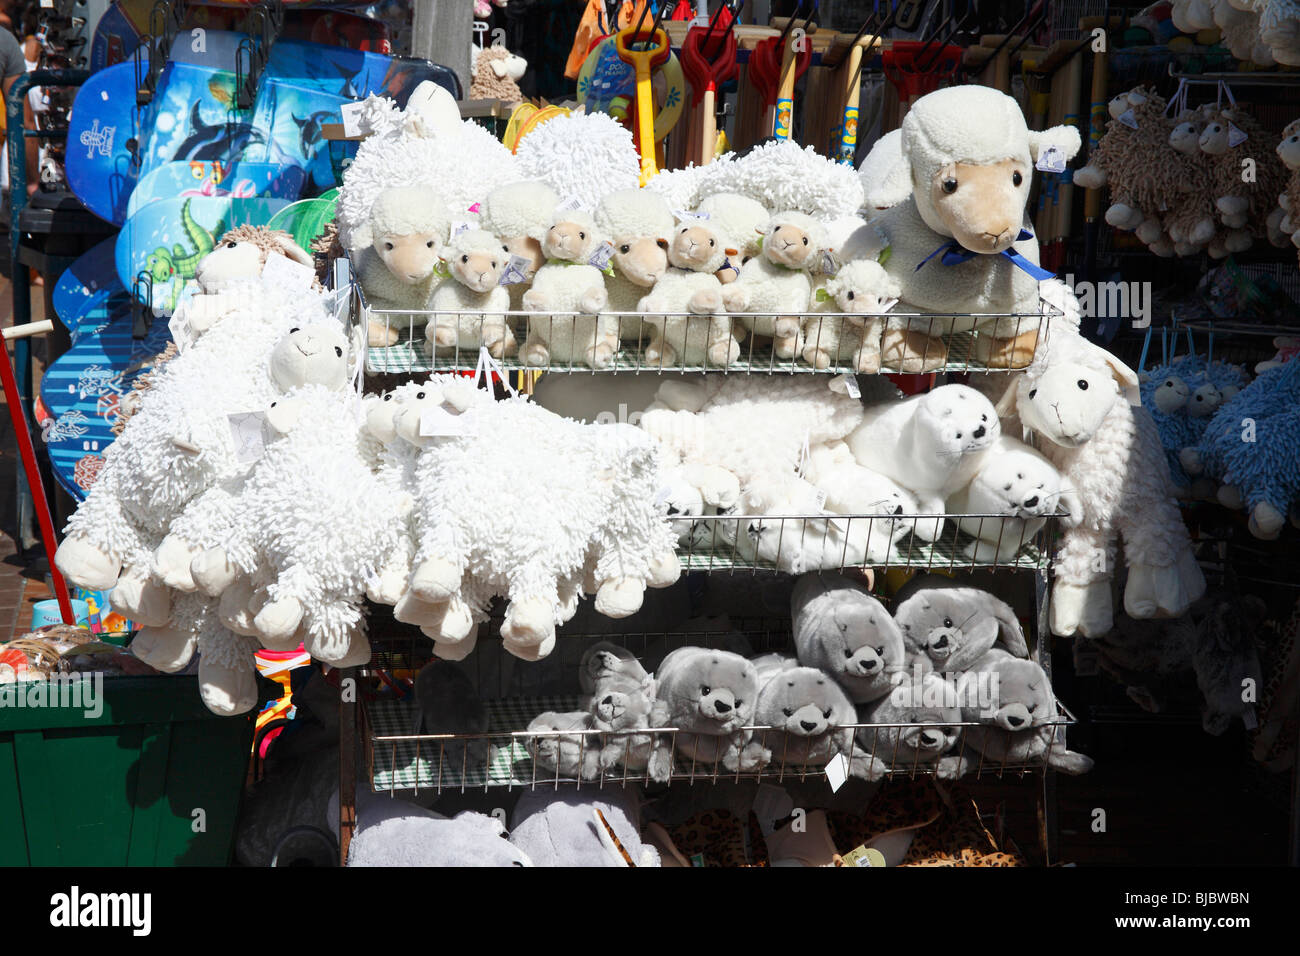 Cuddly Toys and souvenirs for sale, De Koog, Texel Island, Holland Stock Photo